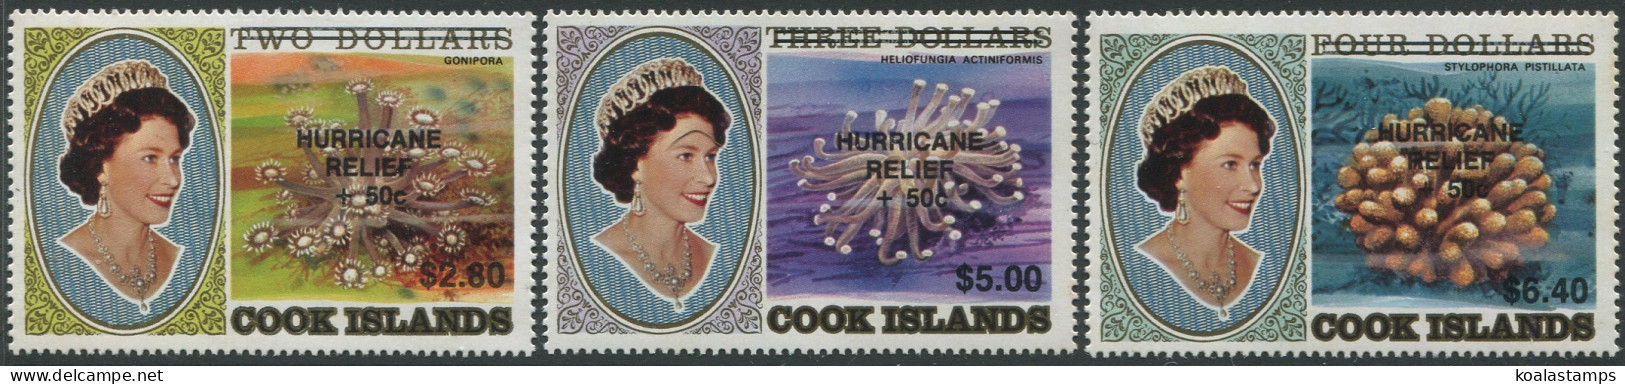 Cook Islands 1987 SG1190-1192 Corals High Values HURRICANE RELIEF +50c (3) MNH - Cook Islands